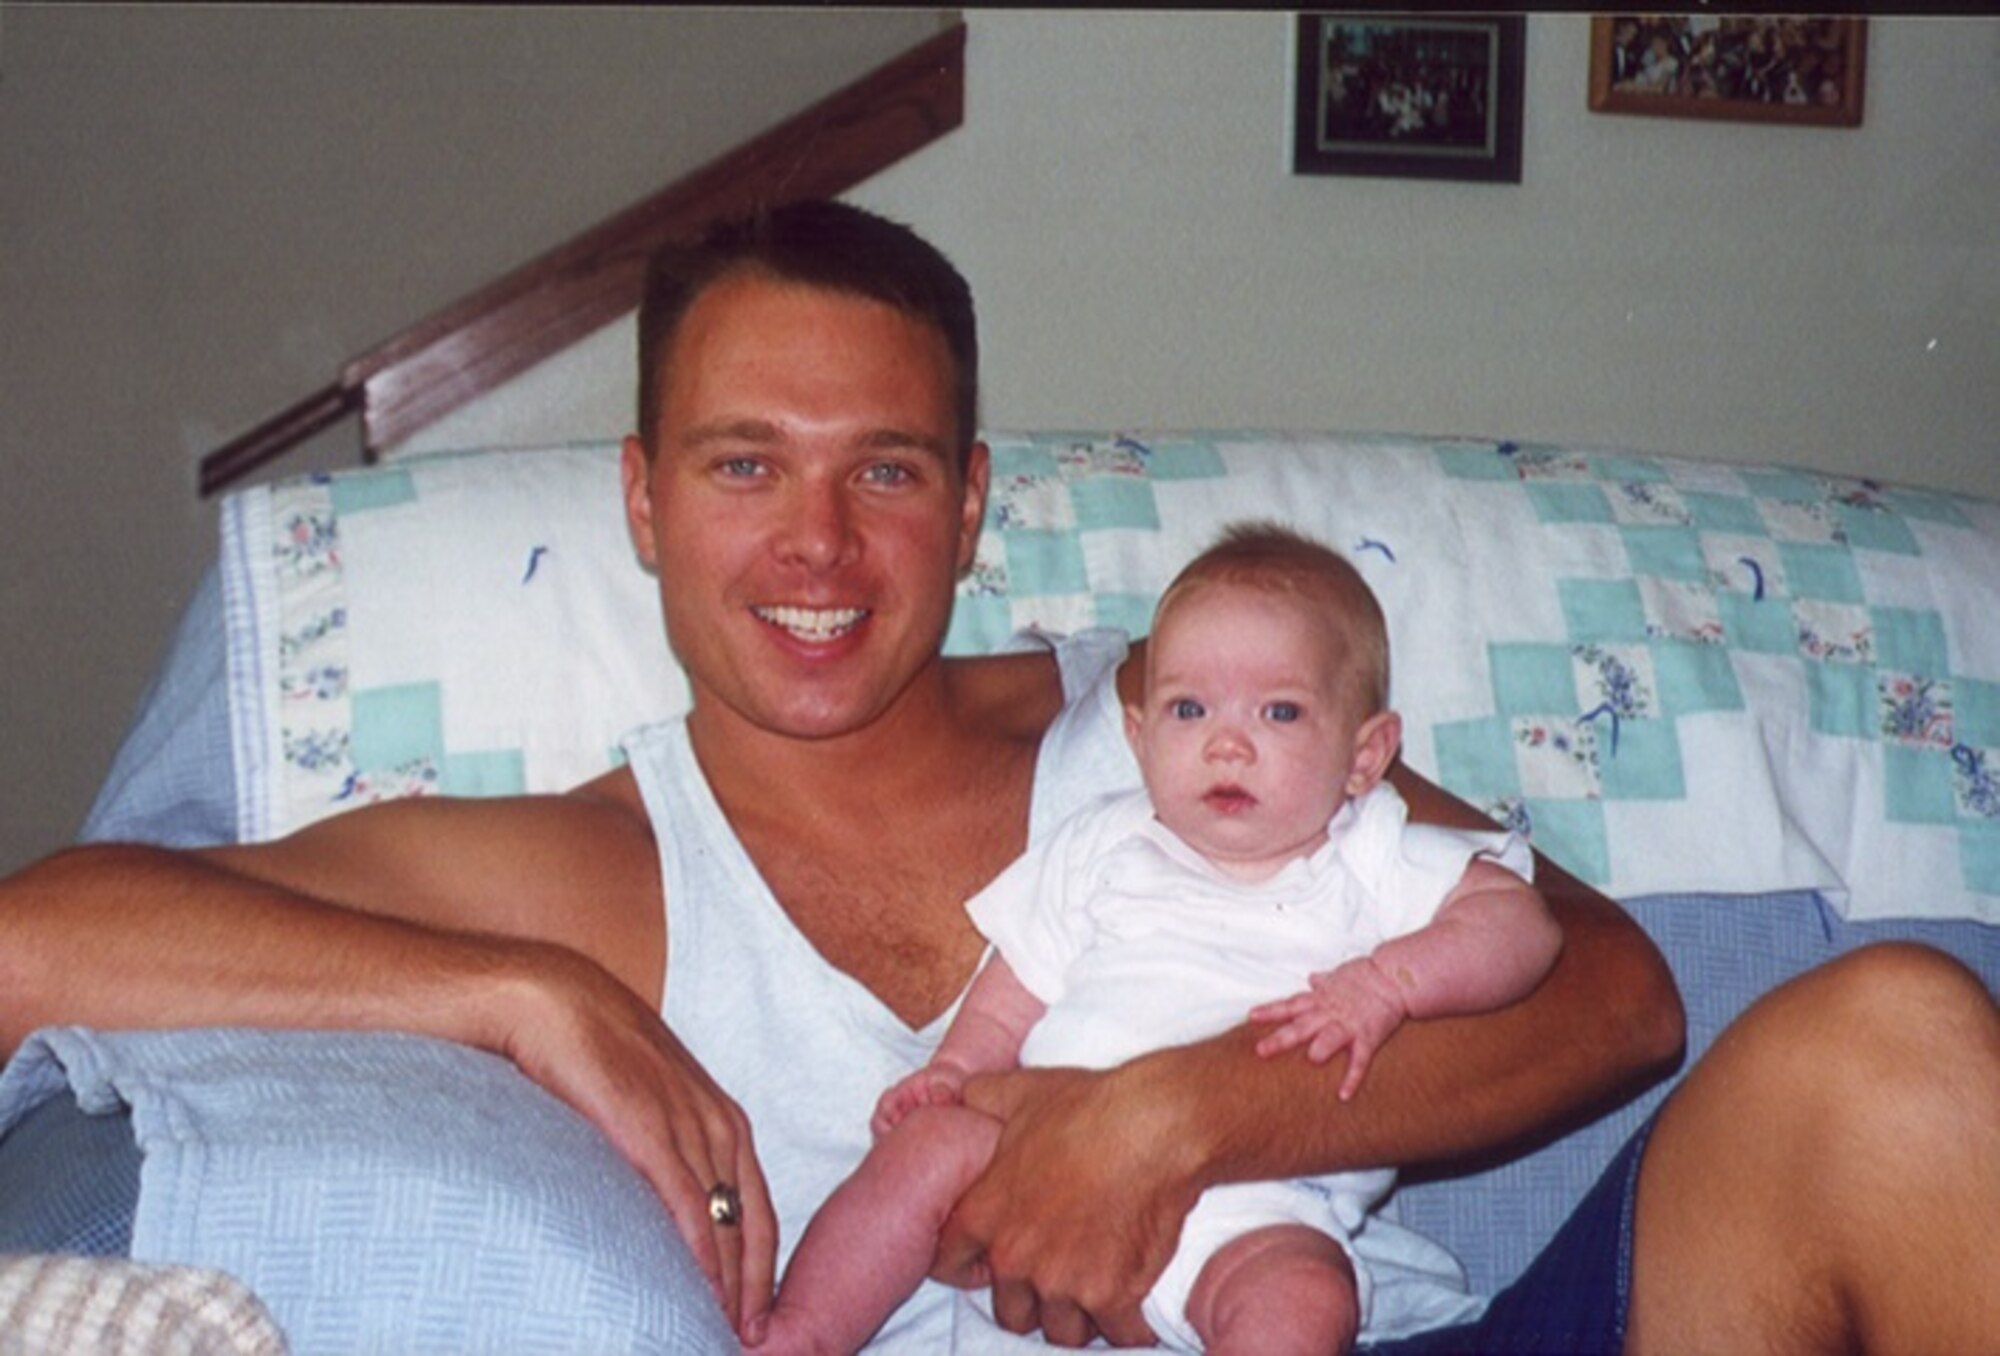 Lt. Col. Luke Lokowich, 5th Reconnaissance Squadron commander, with his daughter Avery at Barksdale AFB, La., during the summer of 2000, a few months after she was born.  (Courtesy photo)